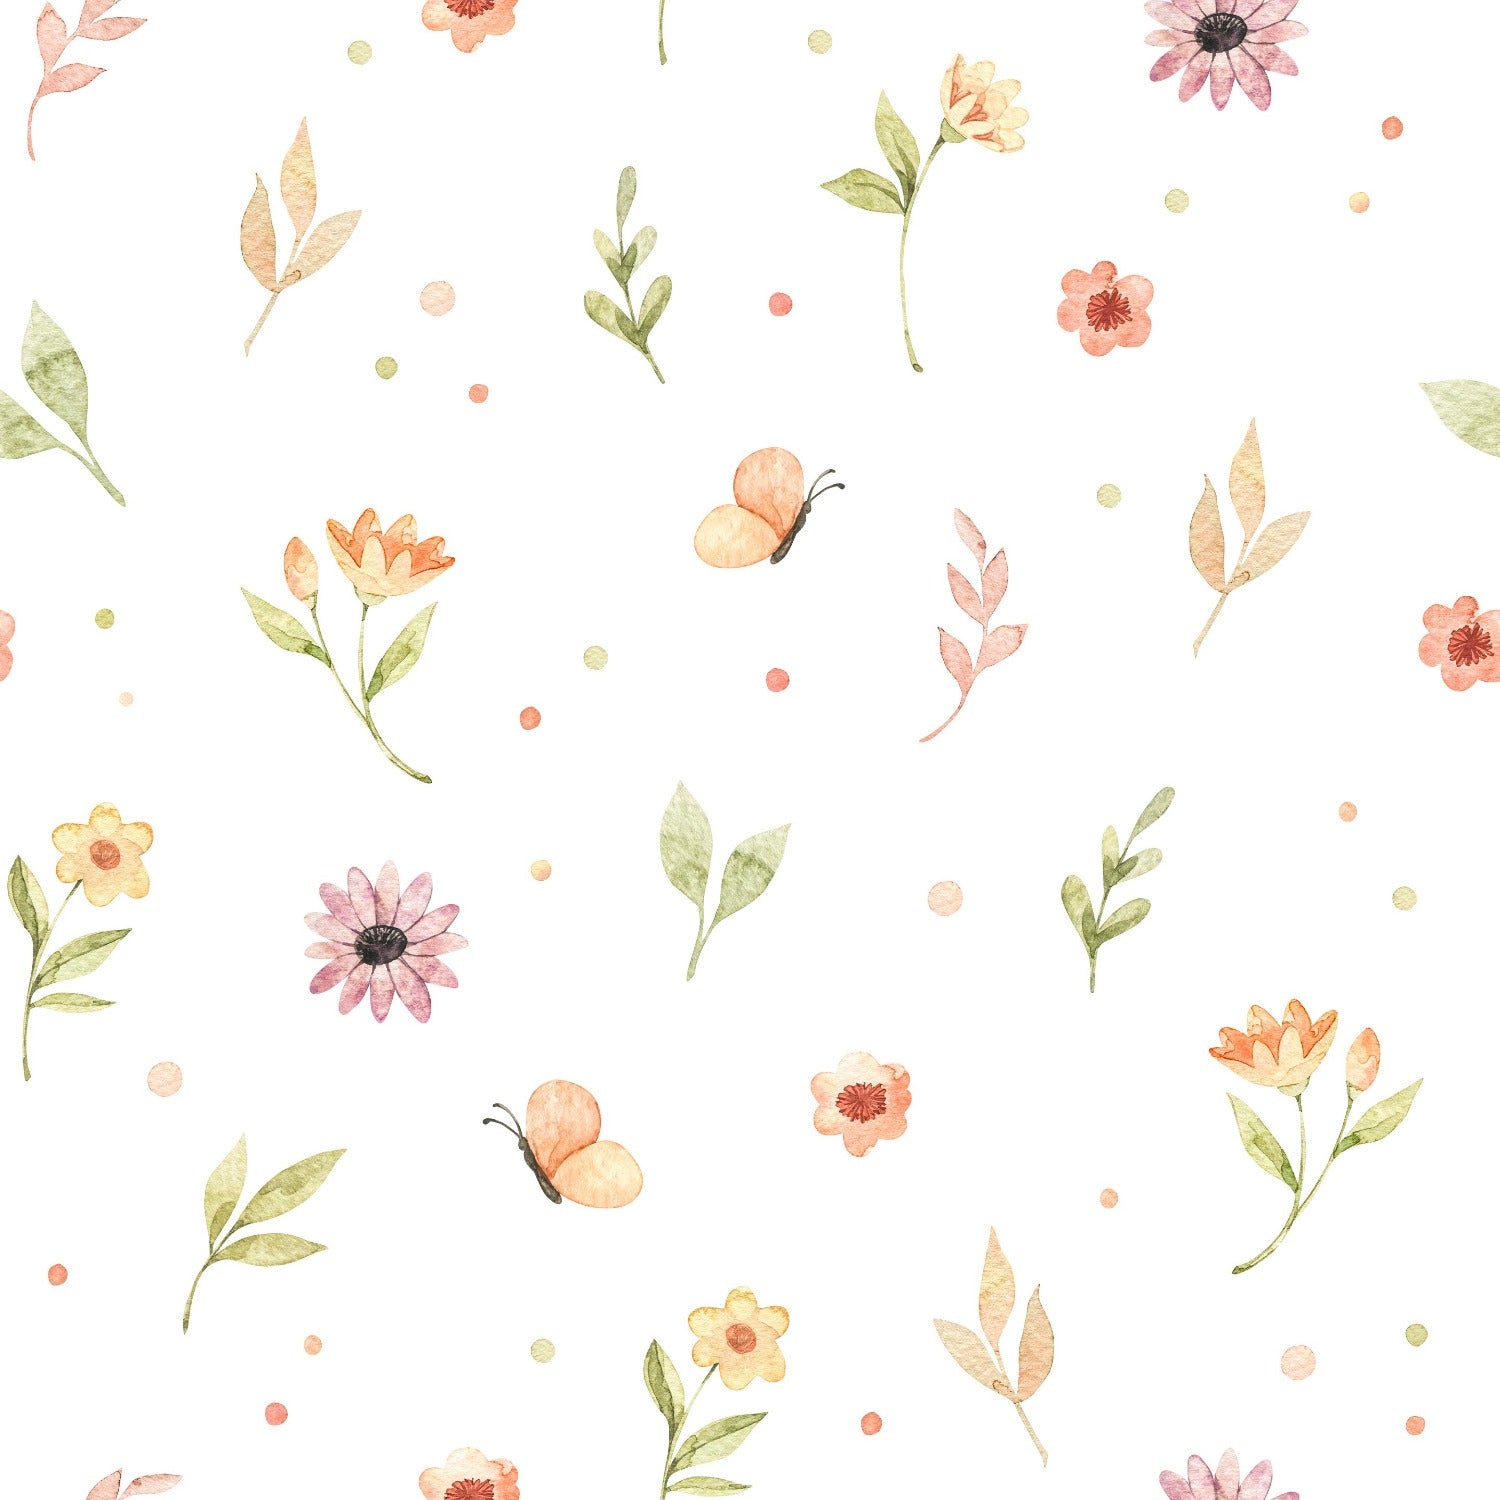 A close-up view of 'Butterfly and Flower Wallpaper' showing a watercolor print with whimsical butterflies and an array of delicate flowers in soft hues of pink, orange, and green, interspersed with tiny dots, creating a playful and enchanting pattern